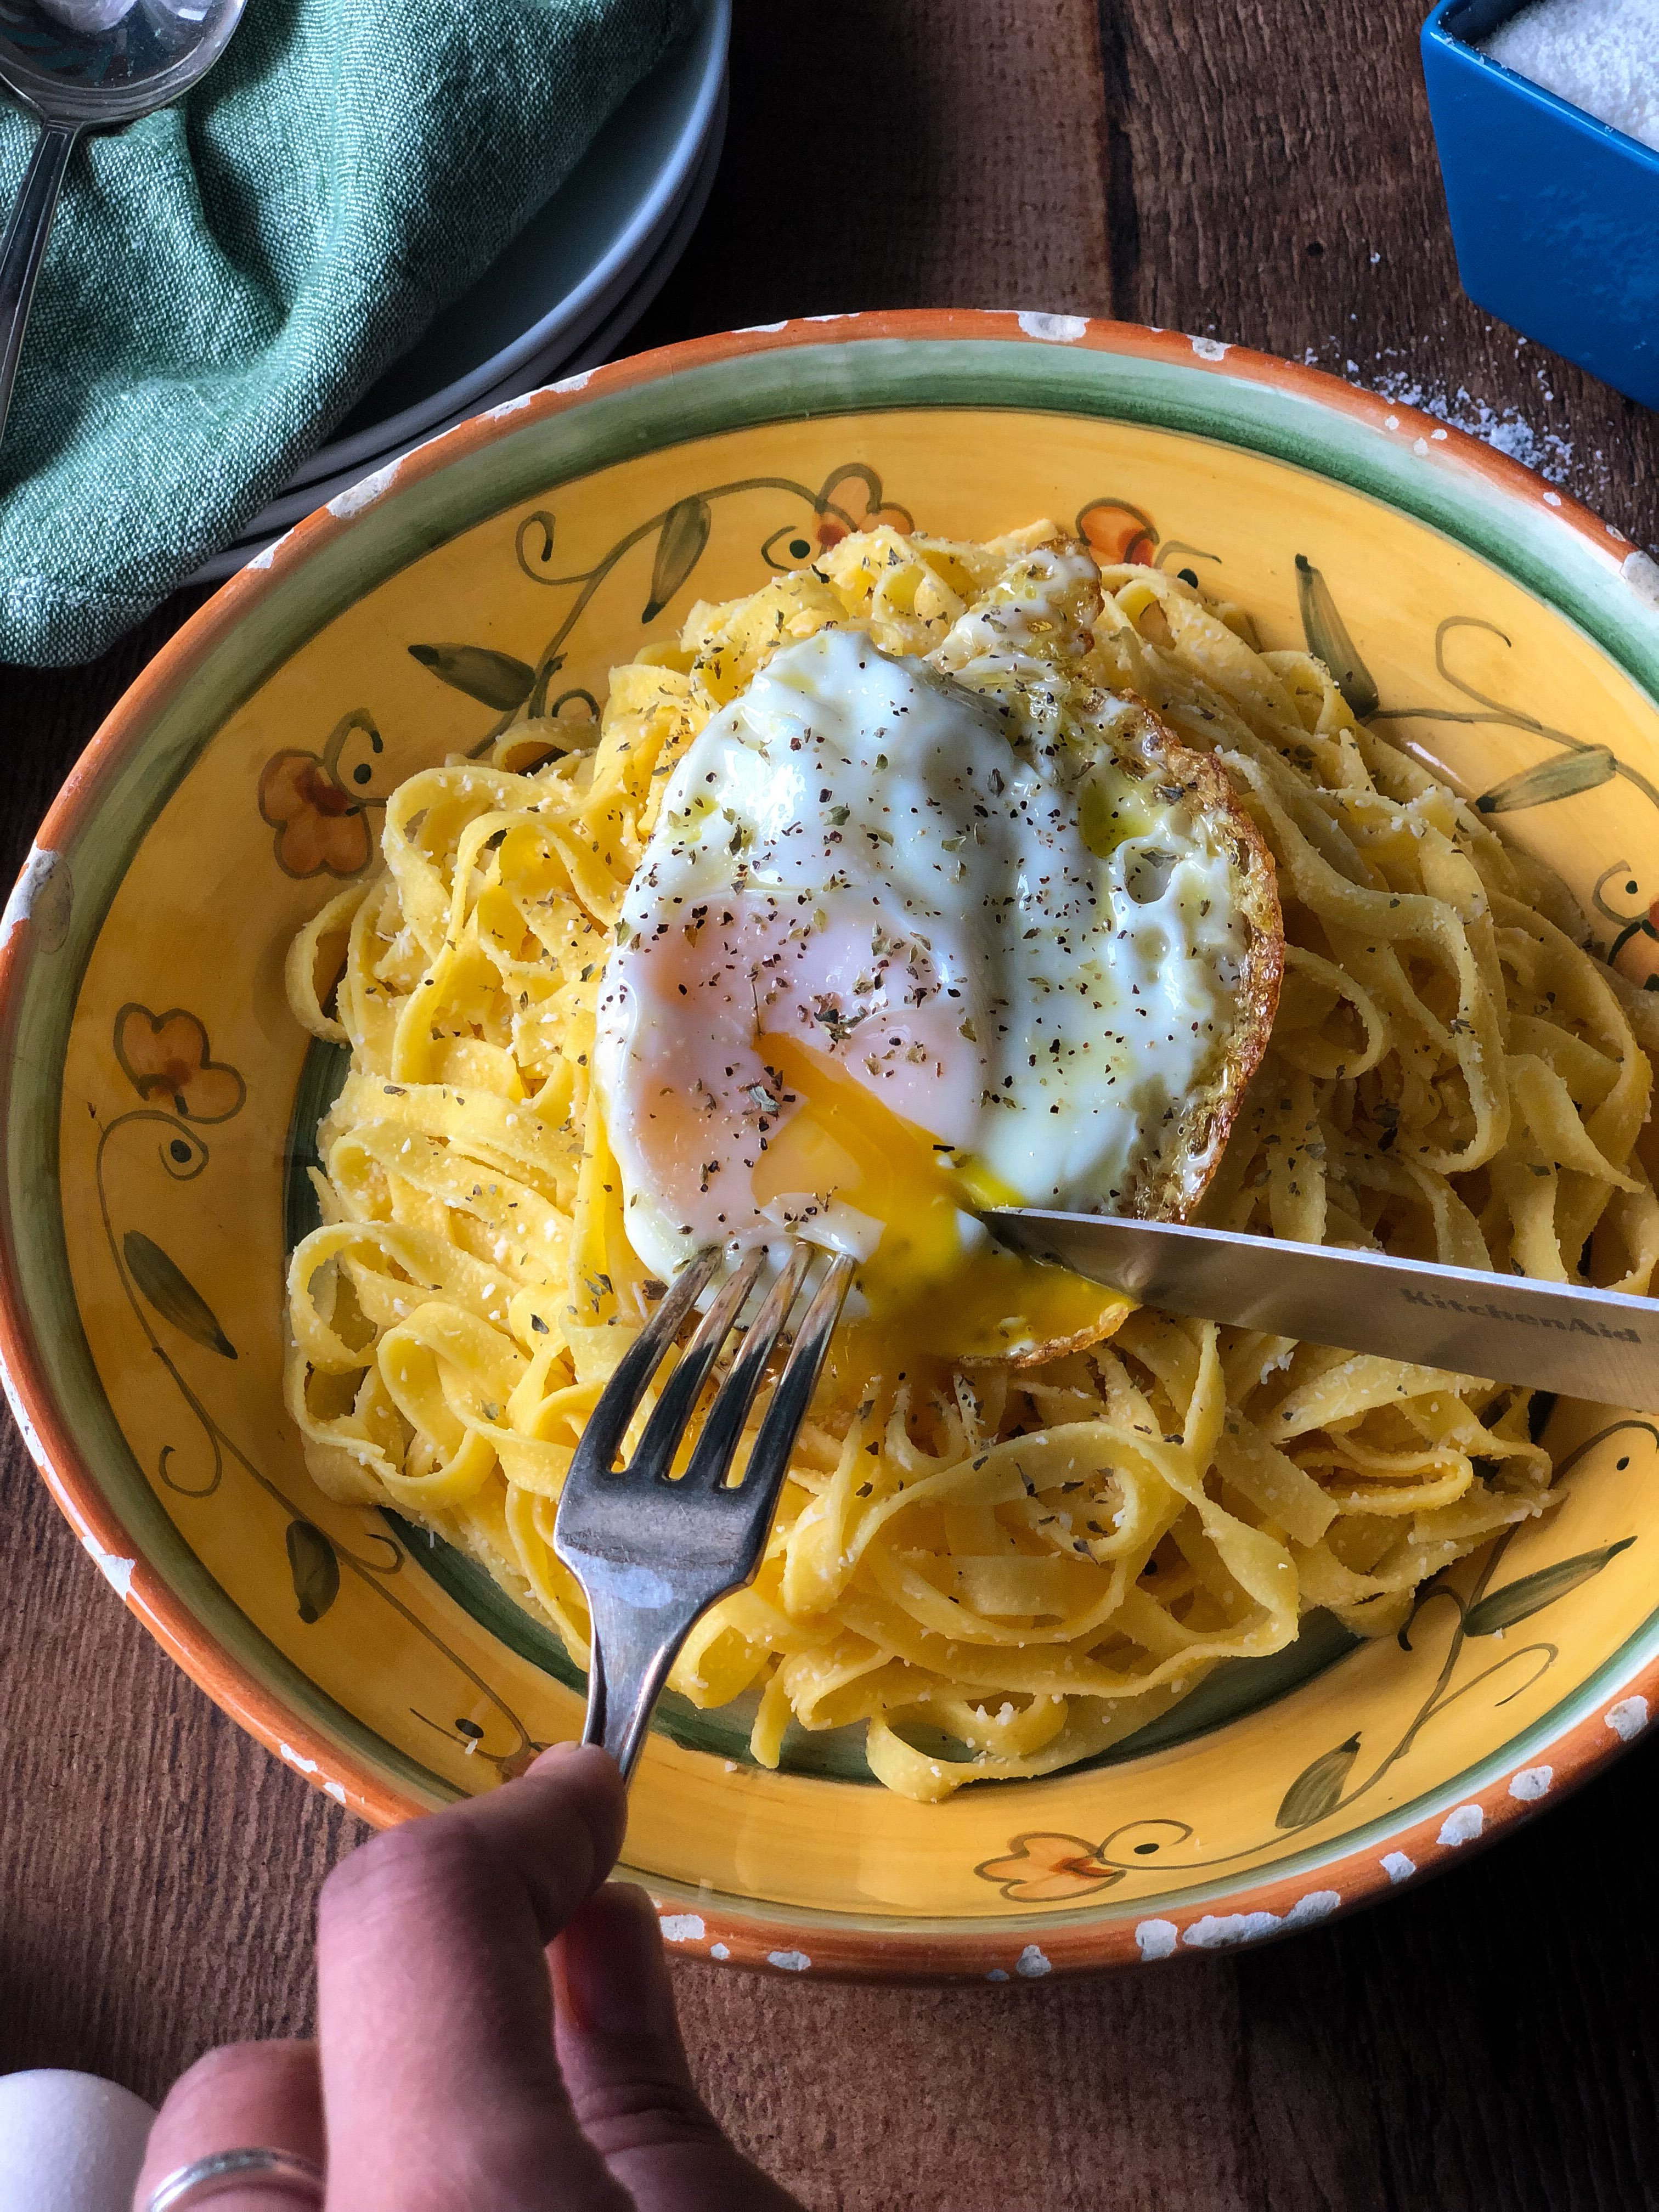 Pasta topped with fried egg